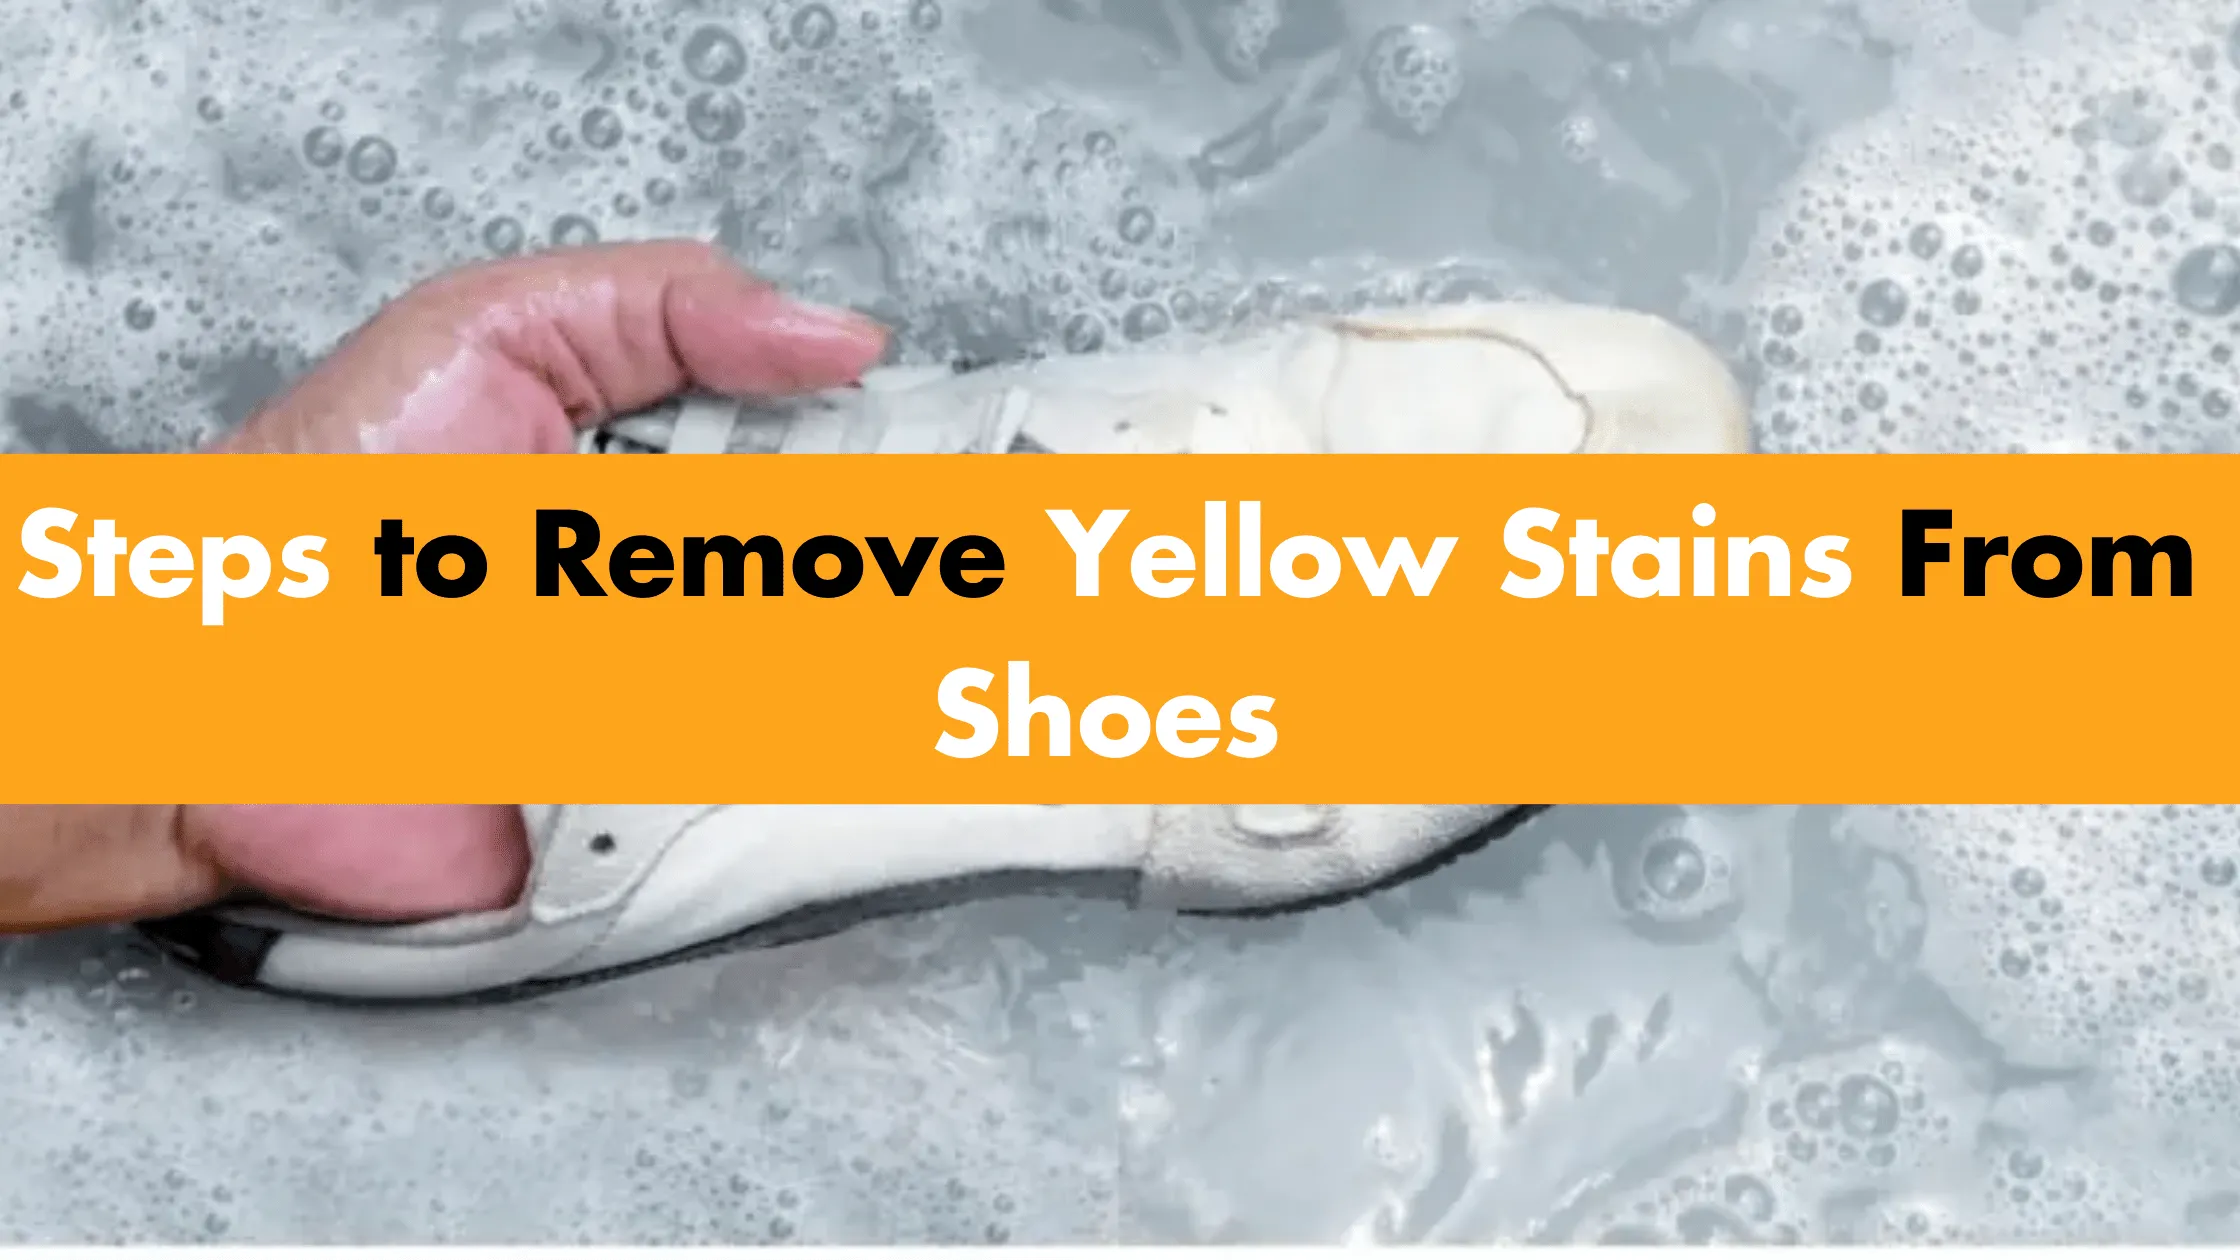 Steps to Remove Yellow Stains From Shoes